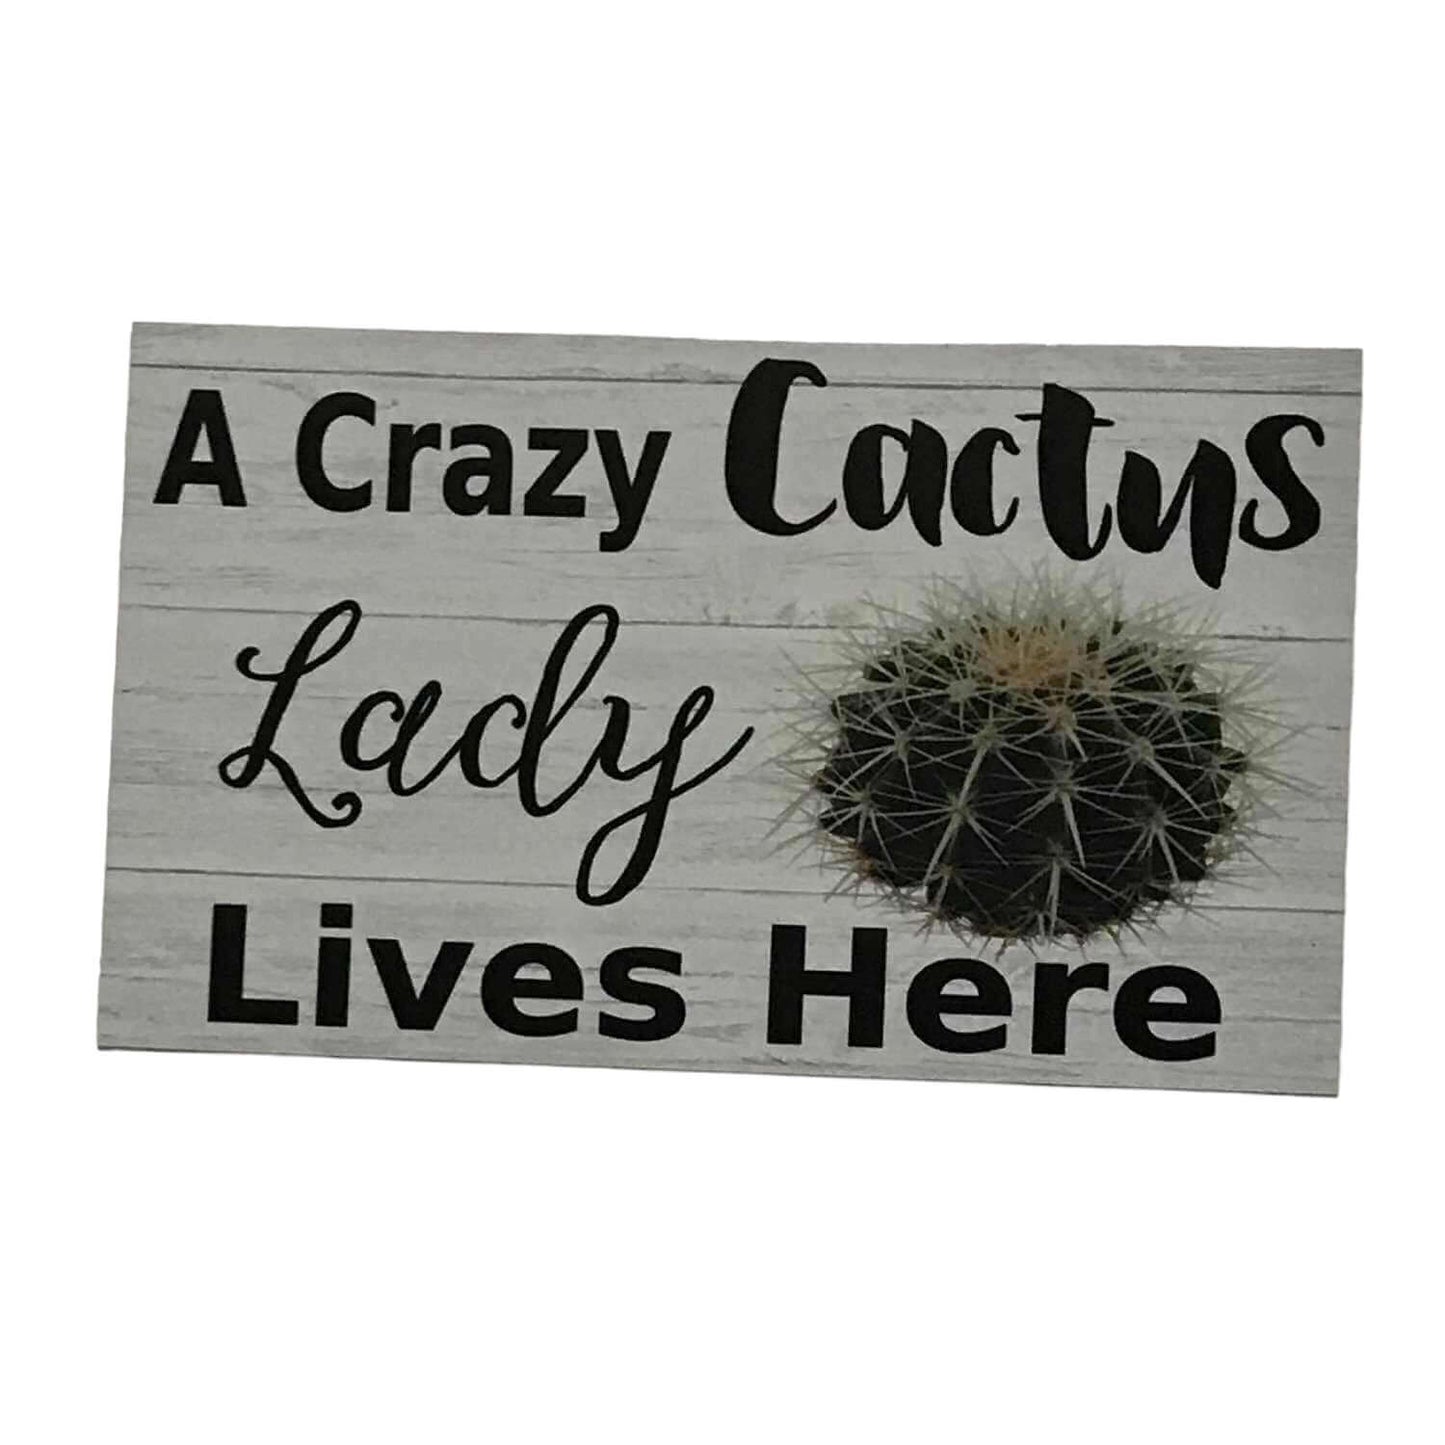 Crazy Cactus Lady Lives Here Sign - The Renmy Store Homewares & Gifts 